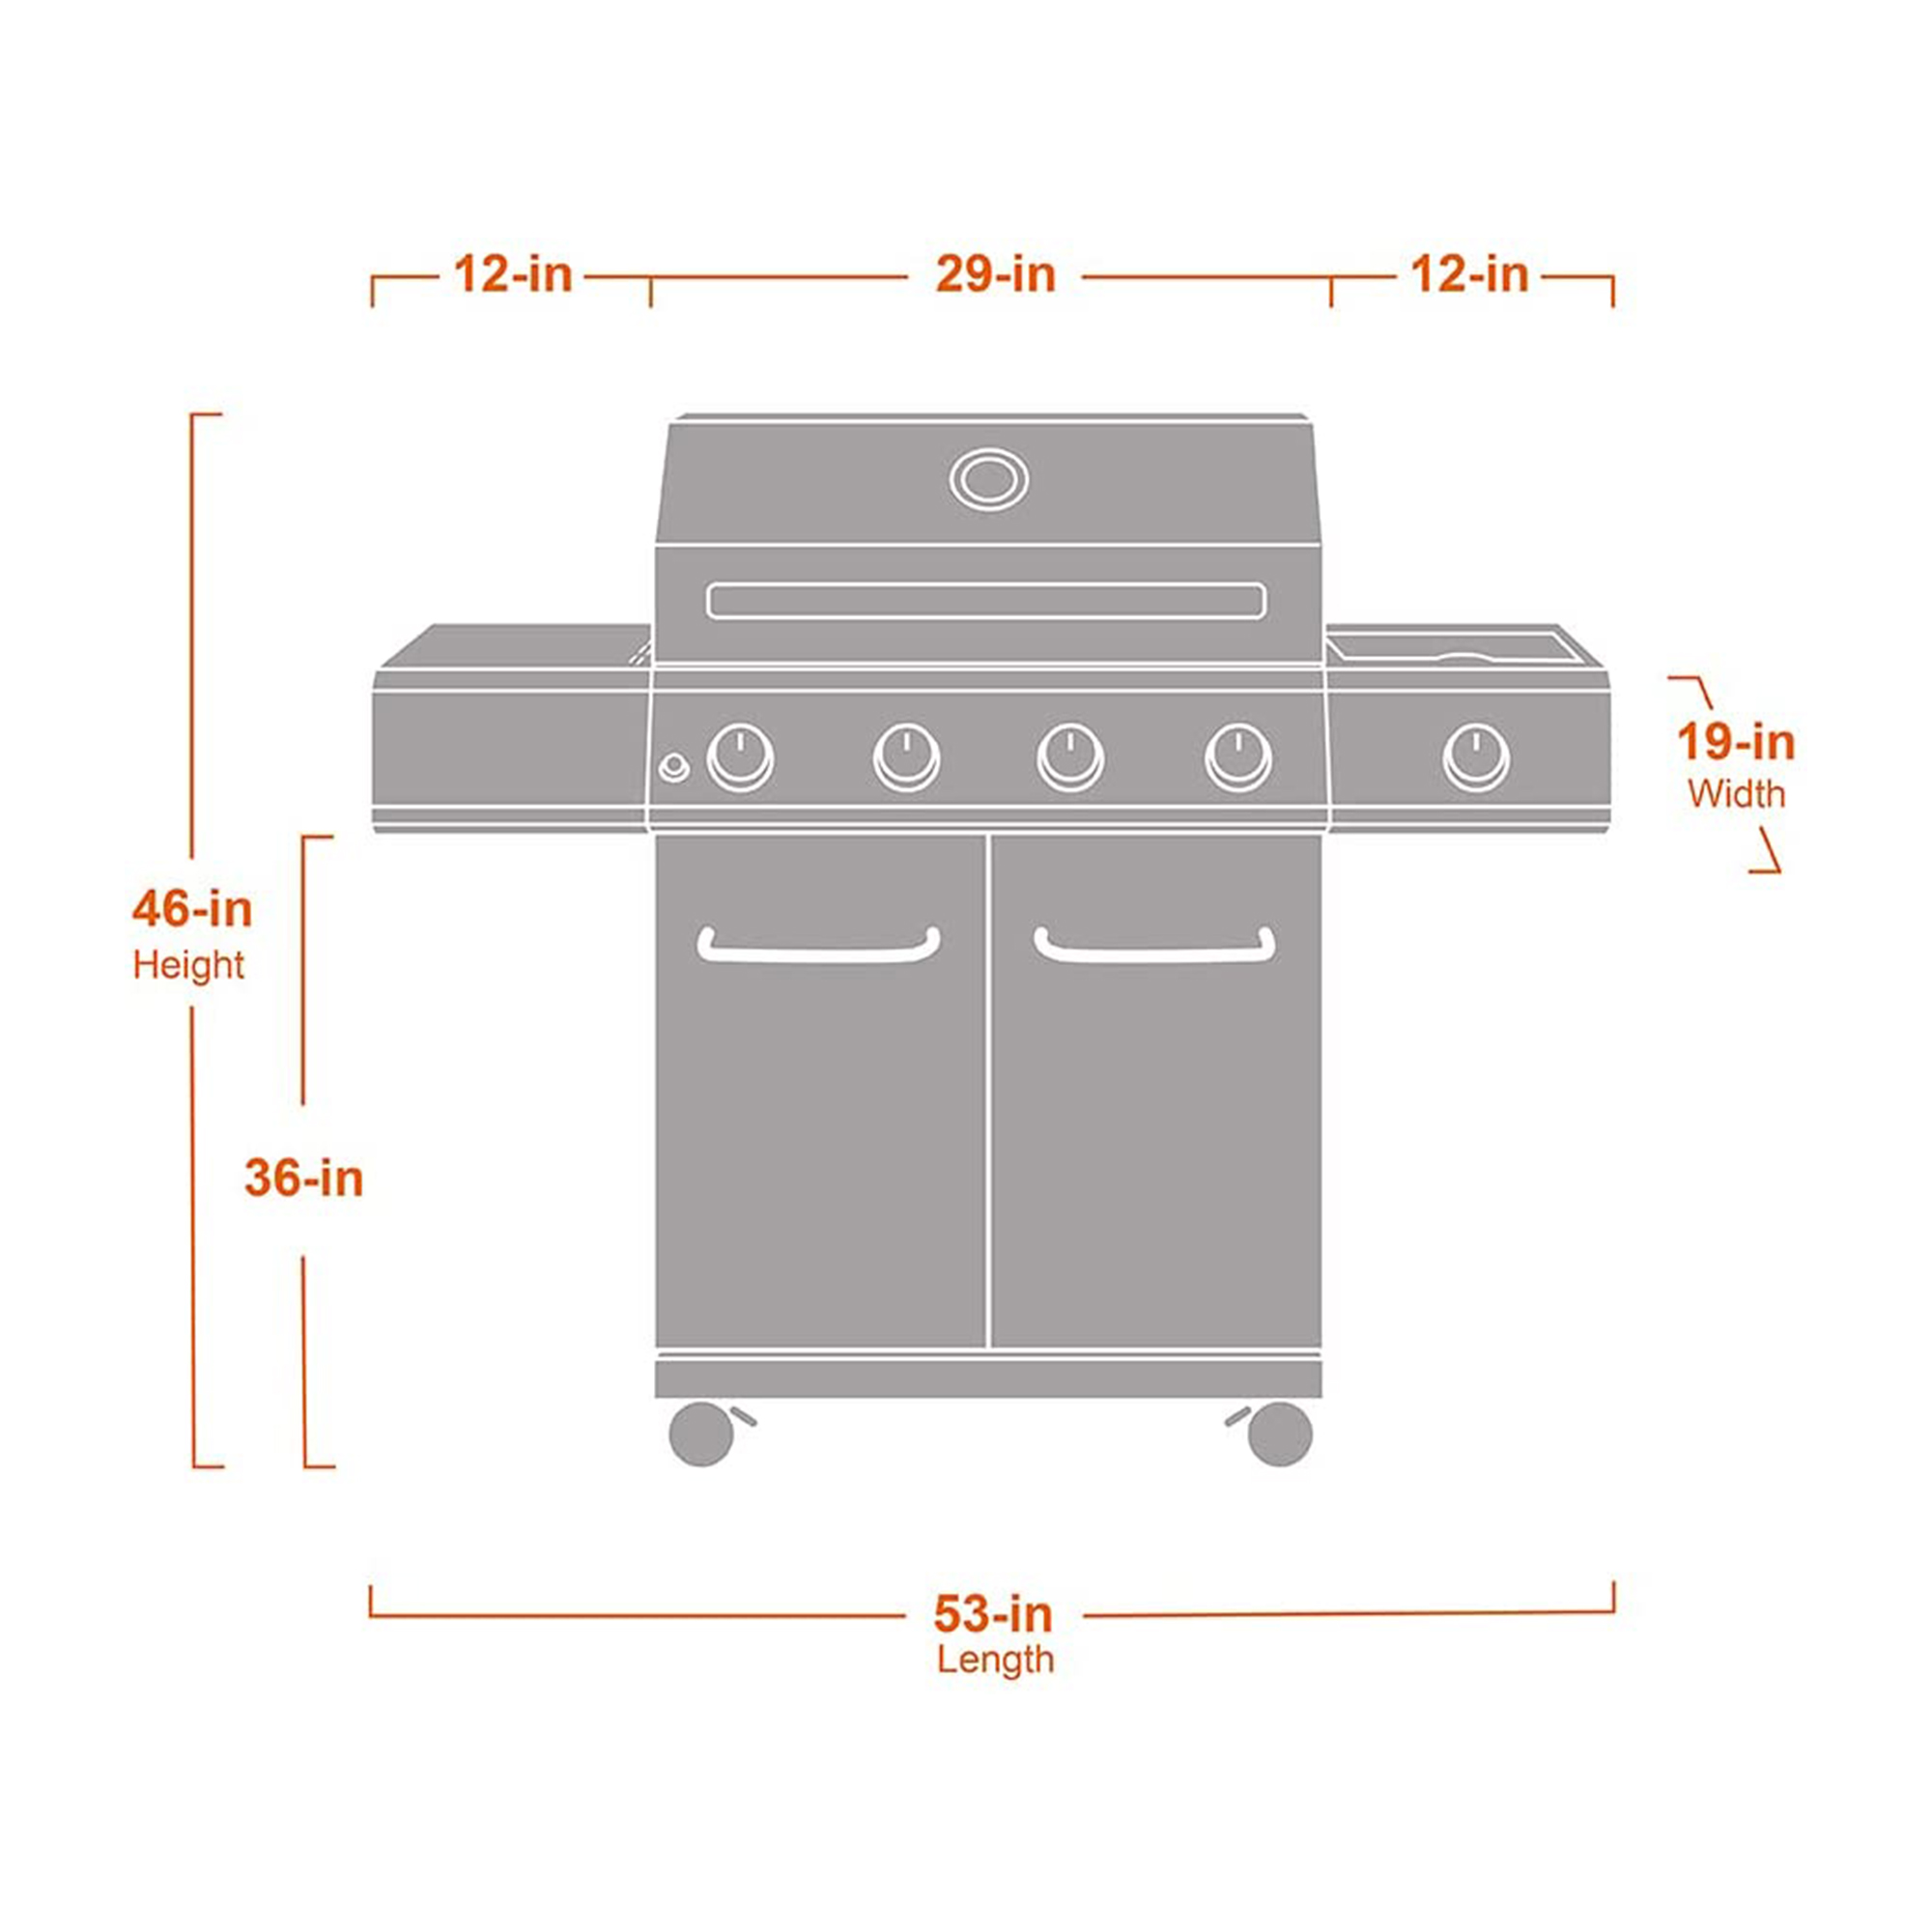 Monument Grills 4 Burner LED Control Stainless Steel Propane Gas Grill - image 5 of 6